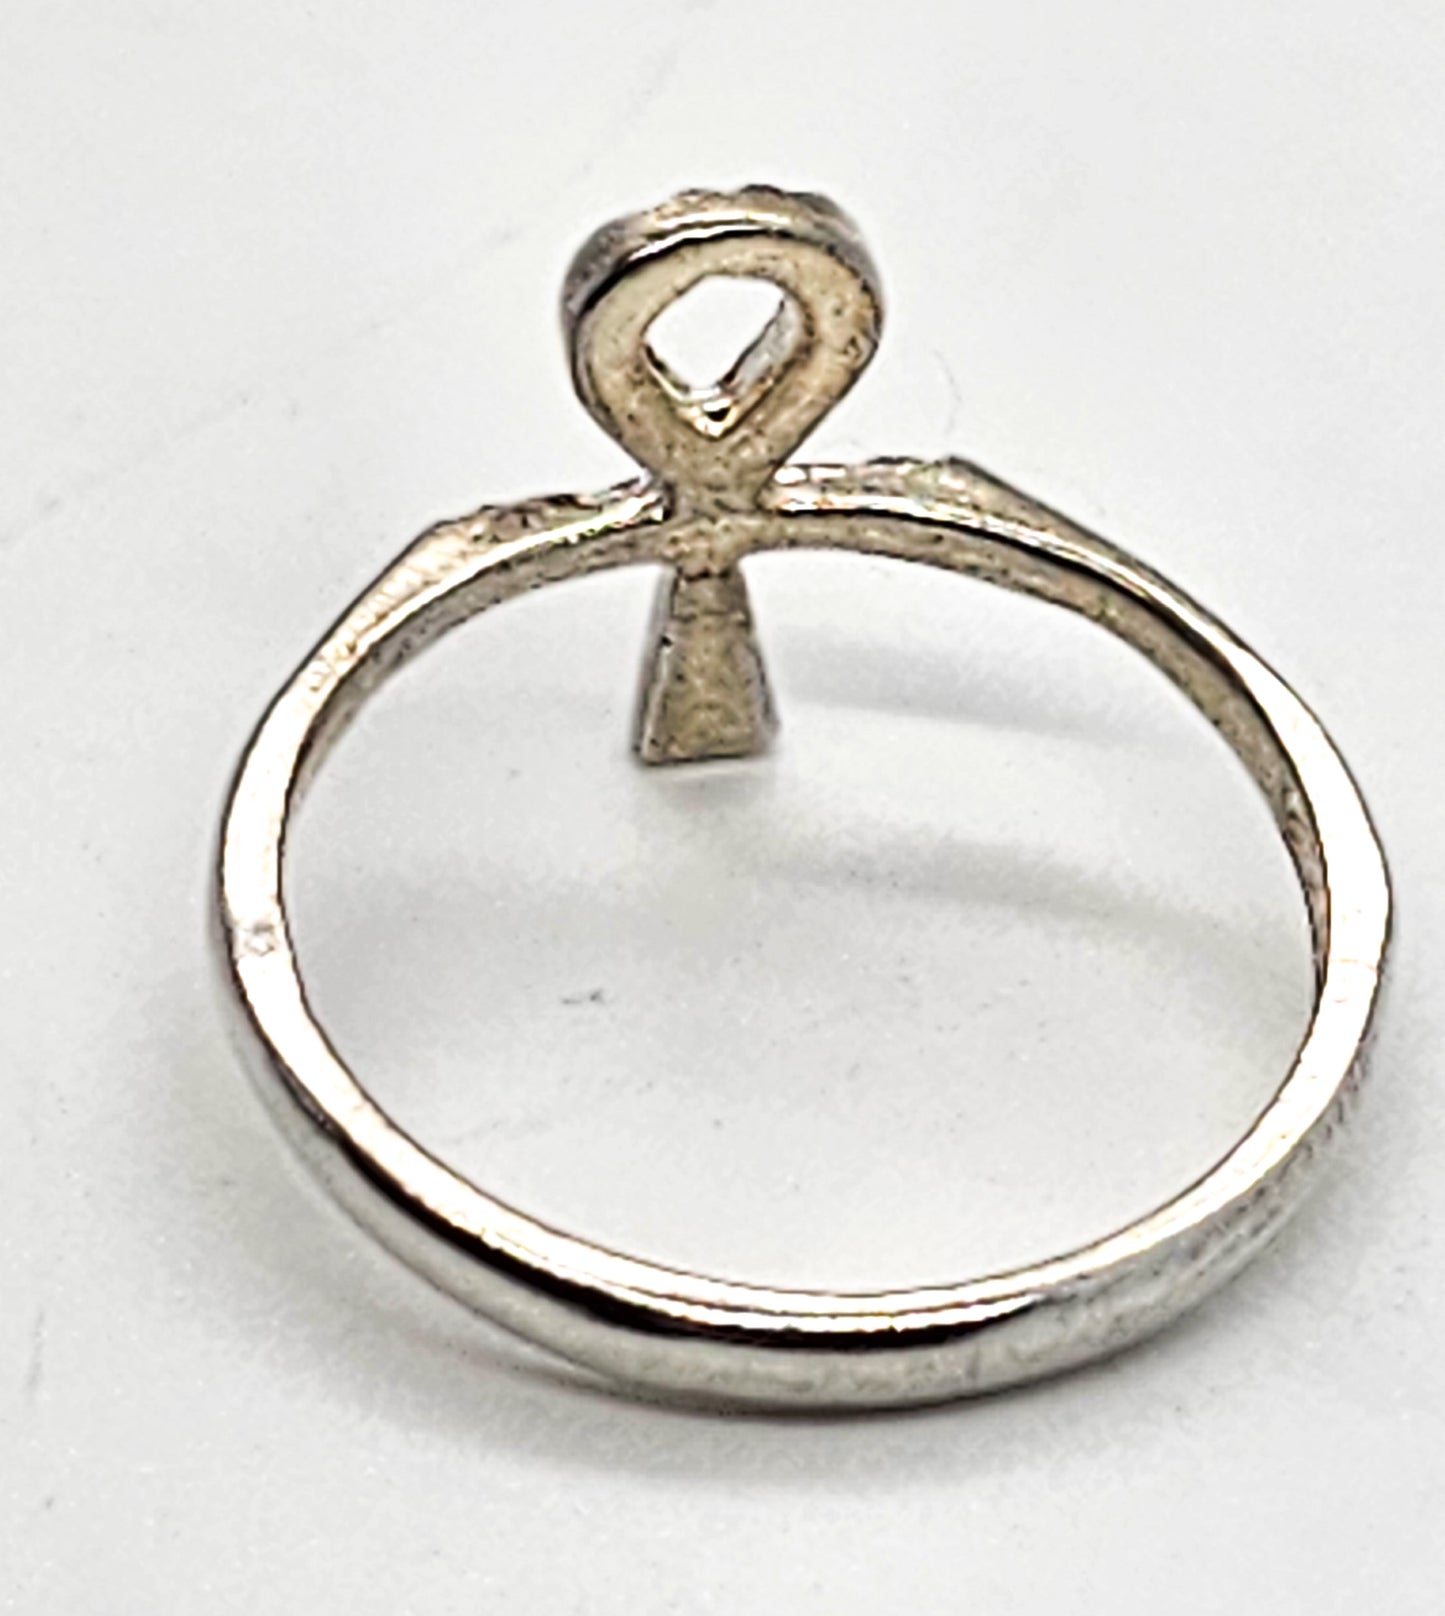 Ankh Key of Life Egyptian Revival vintage sterling silver etched ring size 5.5